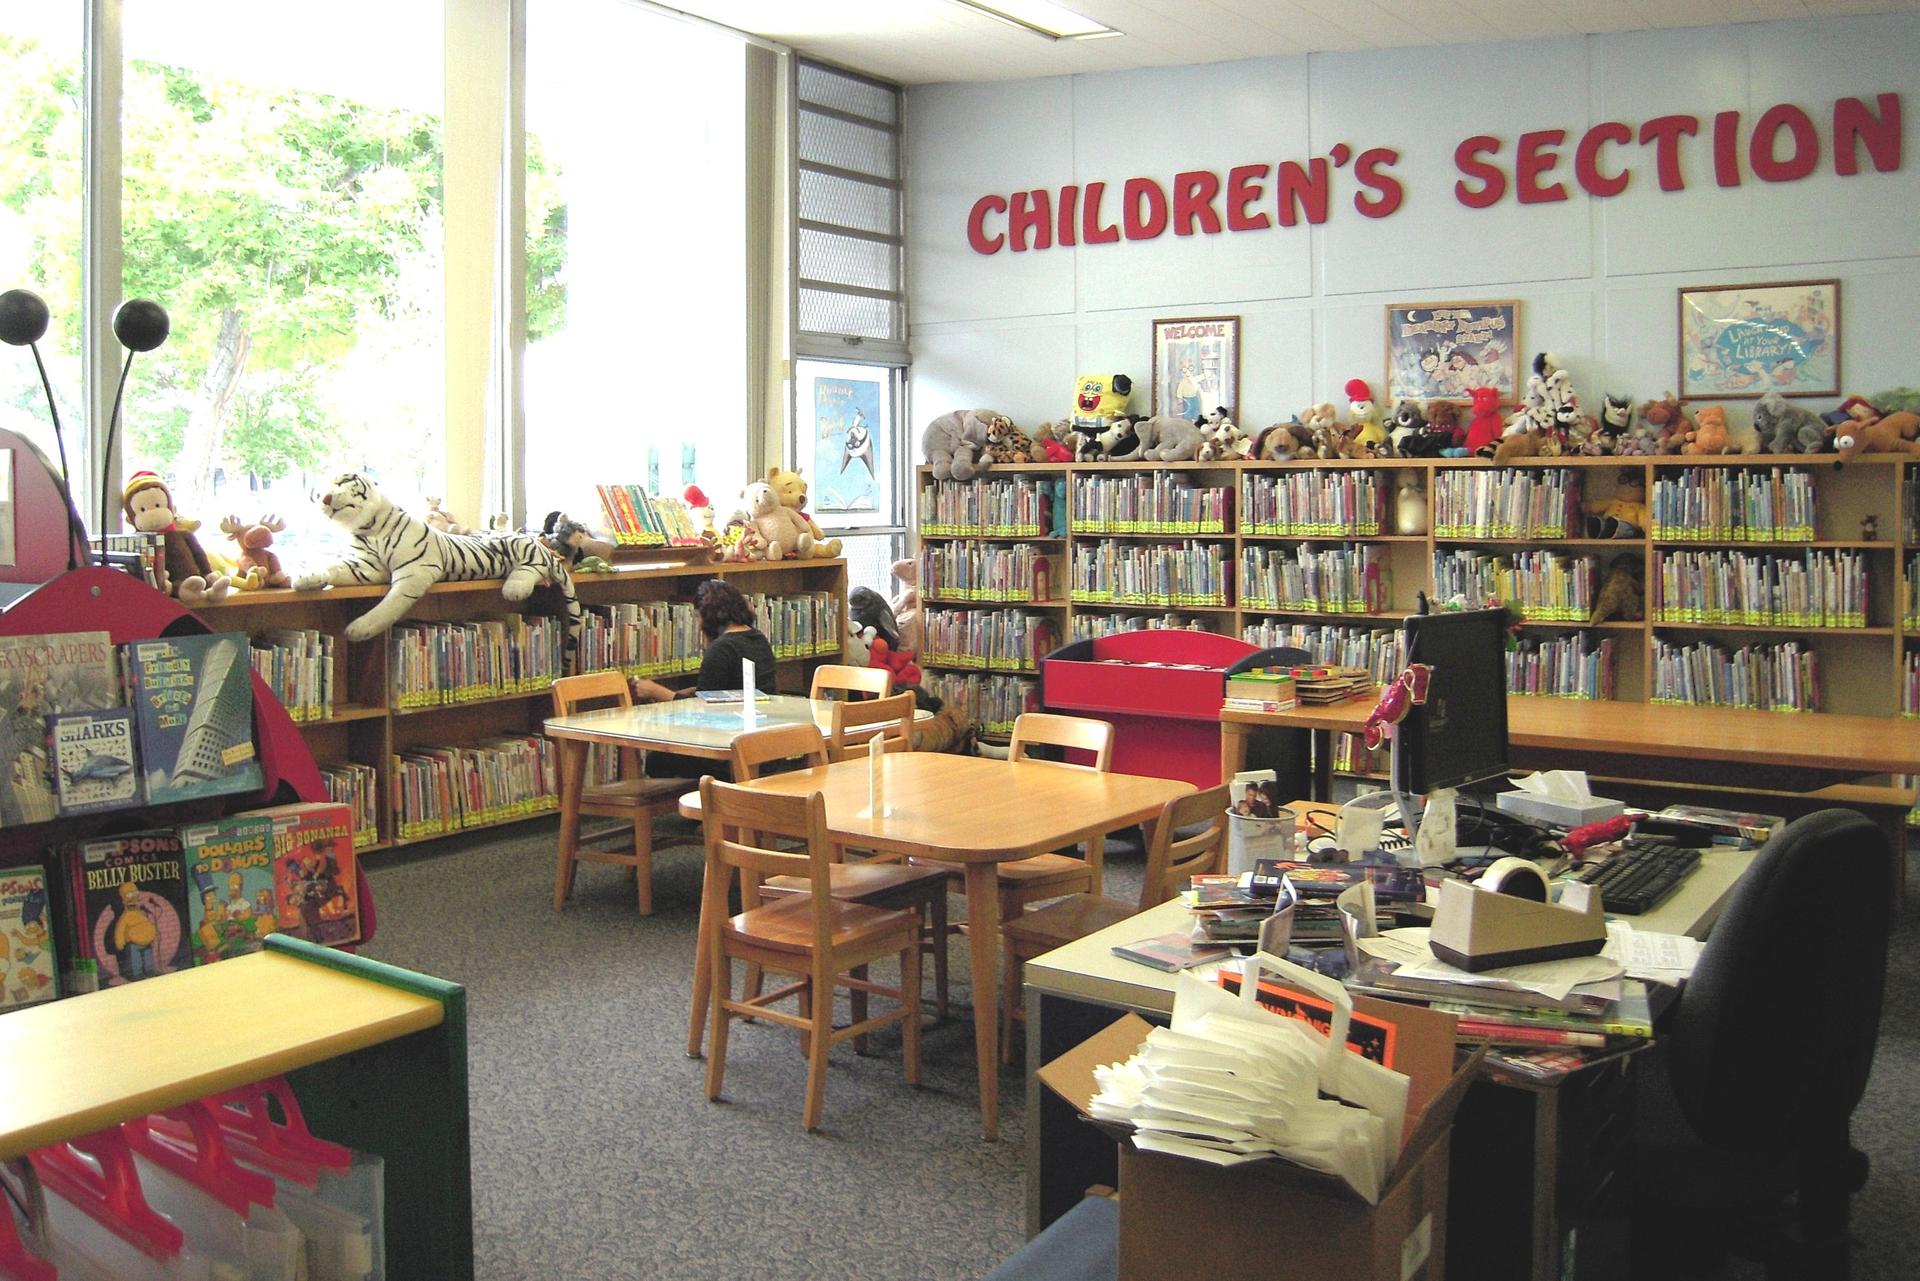 The children's section of the Dana Neighborhood Library